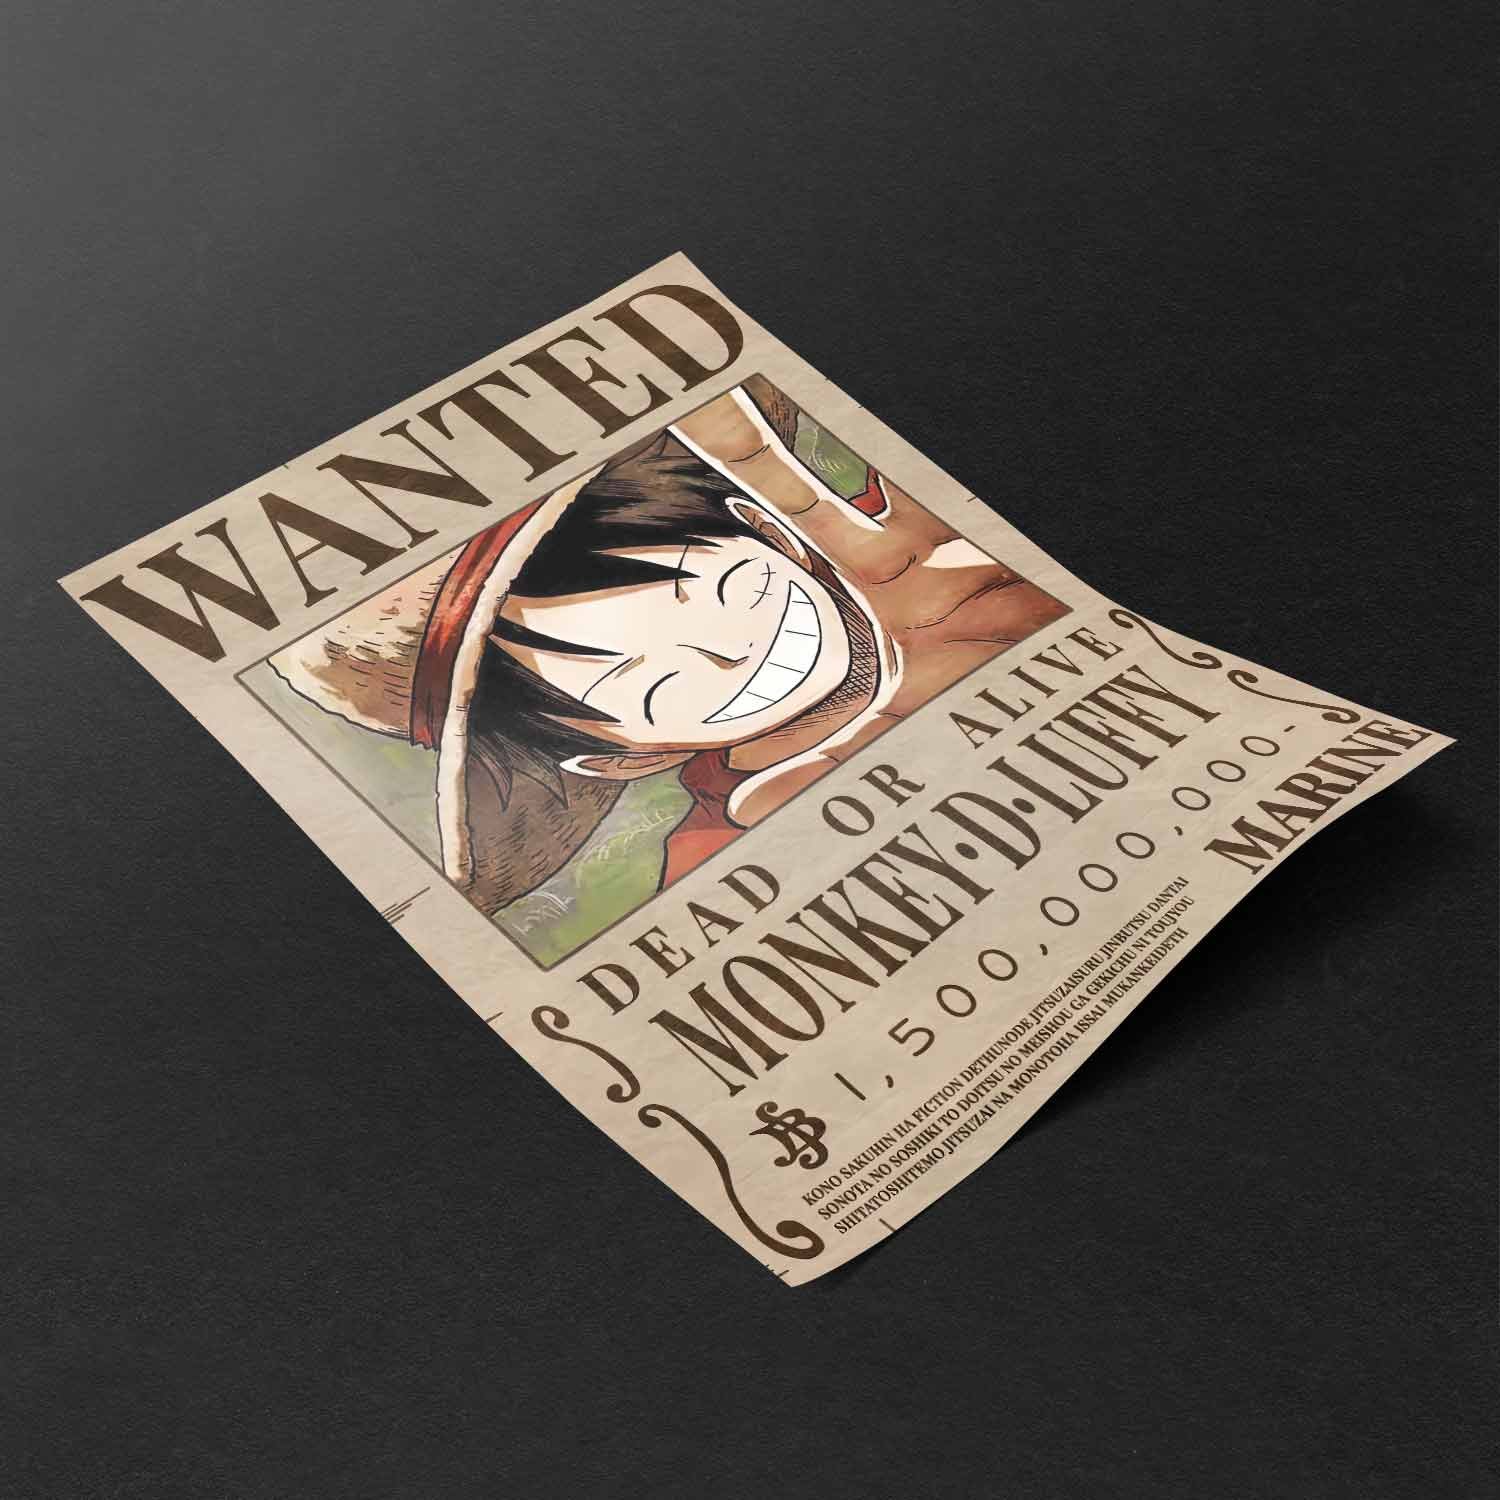 HD wallpaper: One Piece Roronoa Zoro Wanted poster, anime, text,  communication | Wallpaper Flare